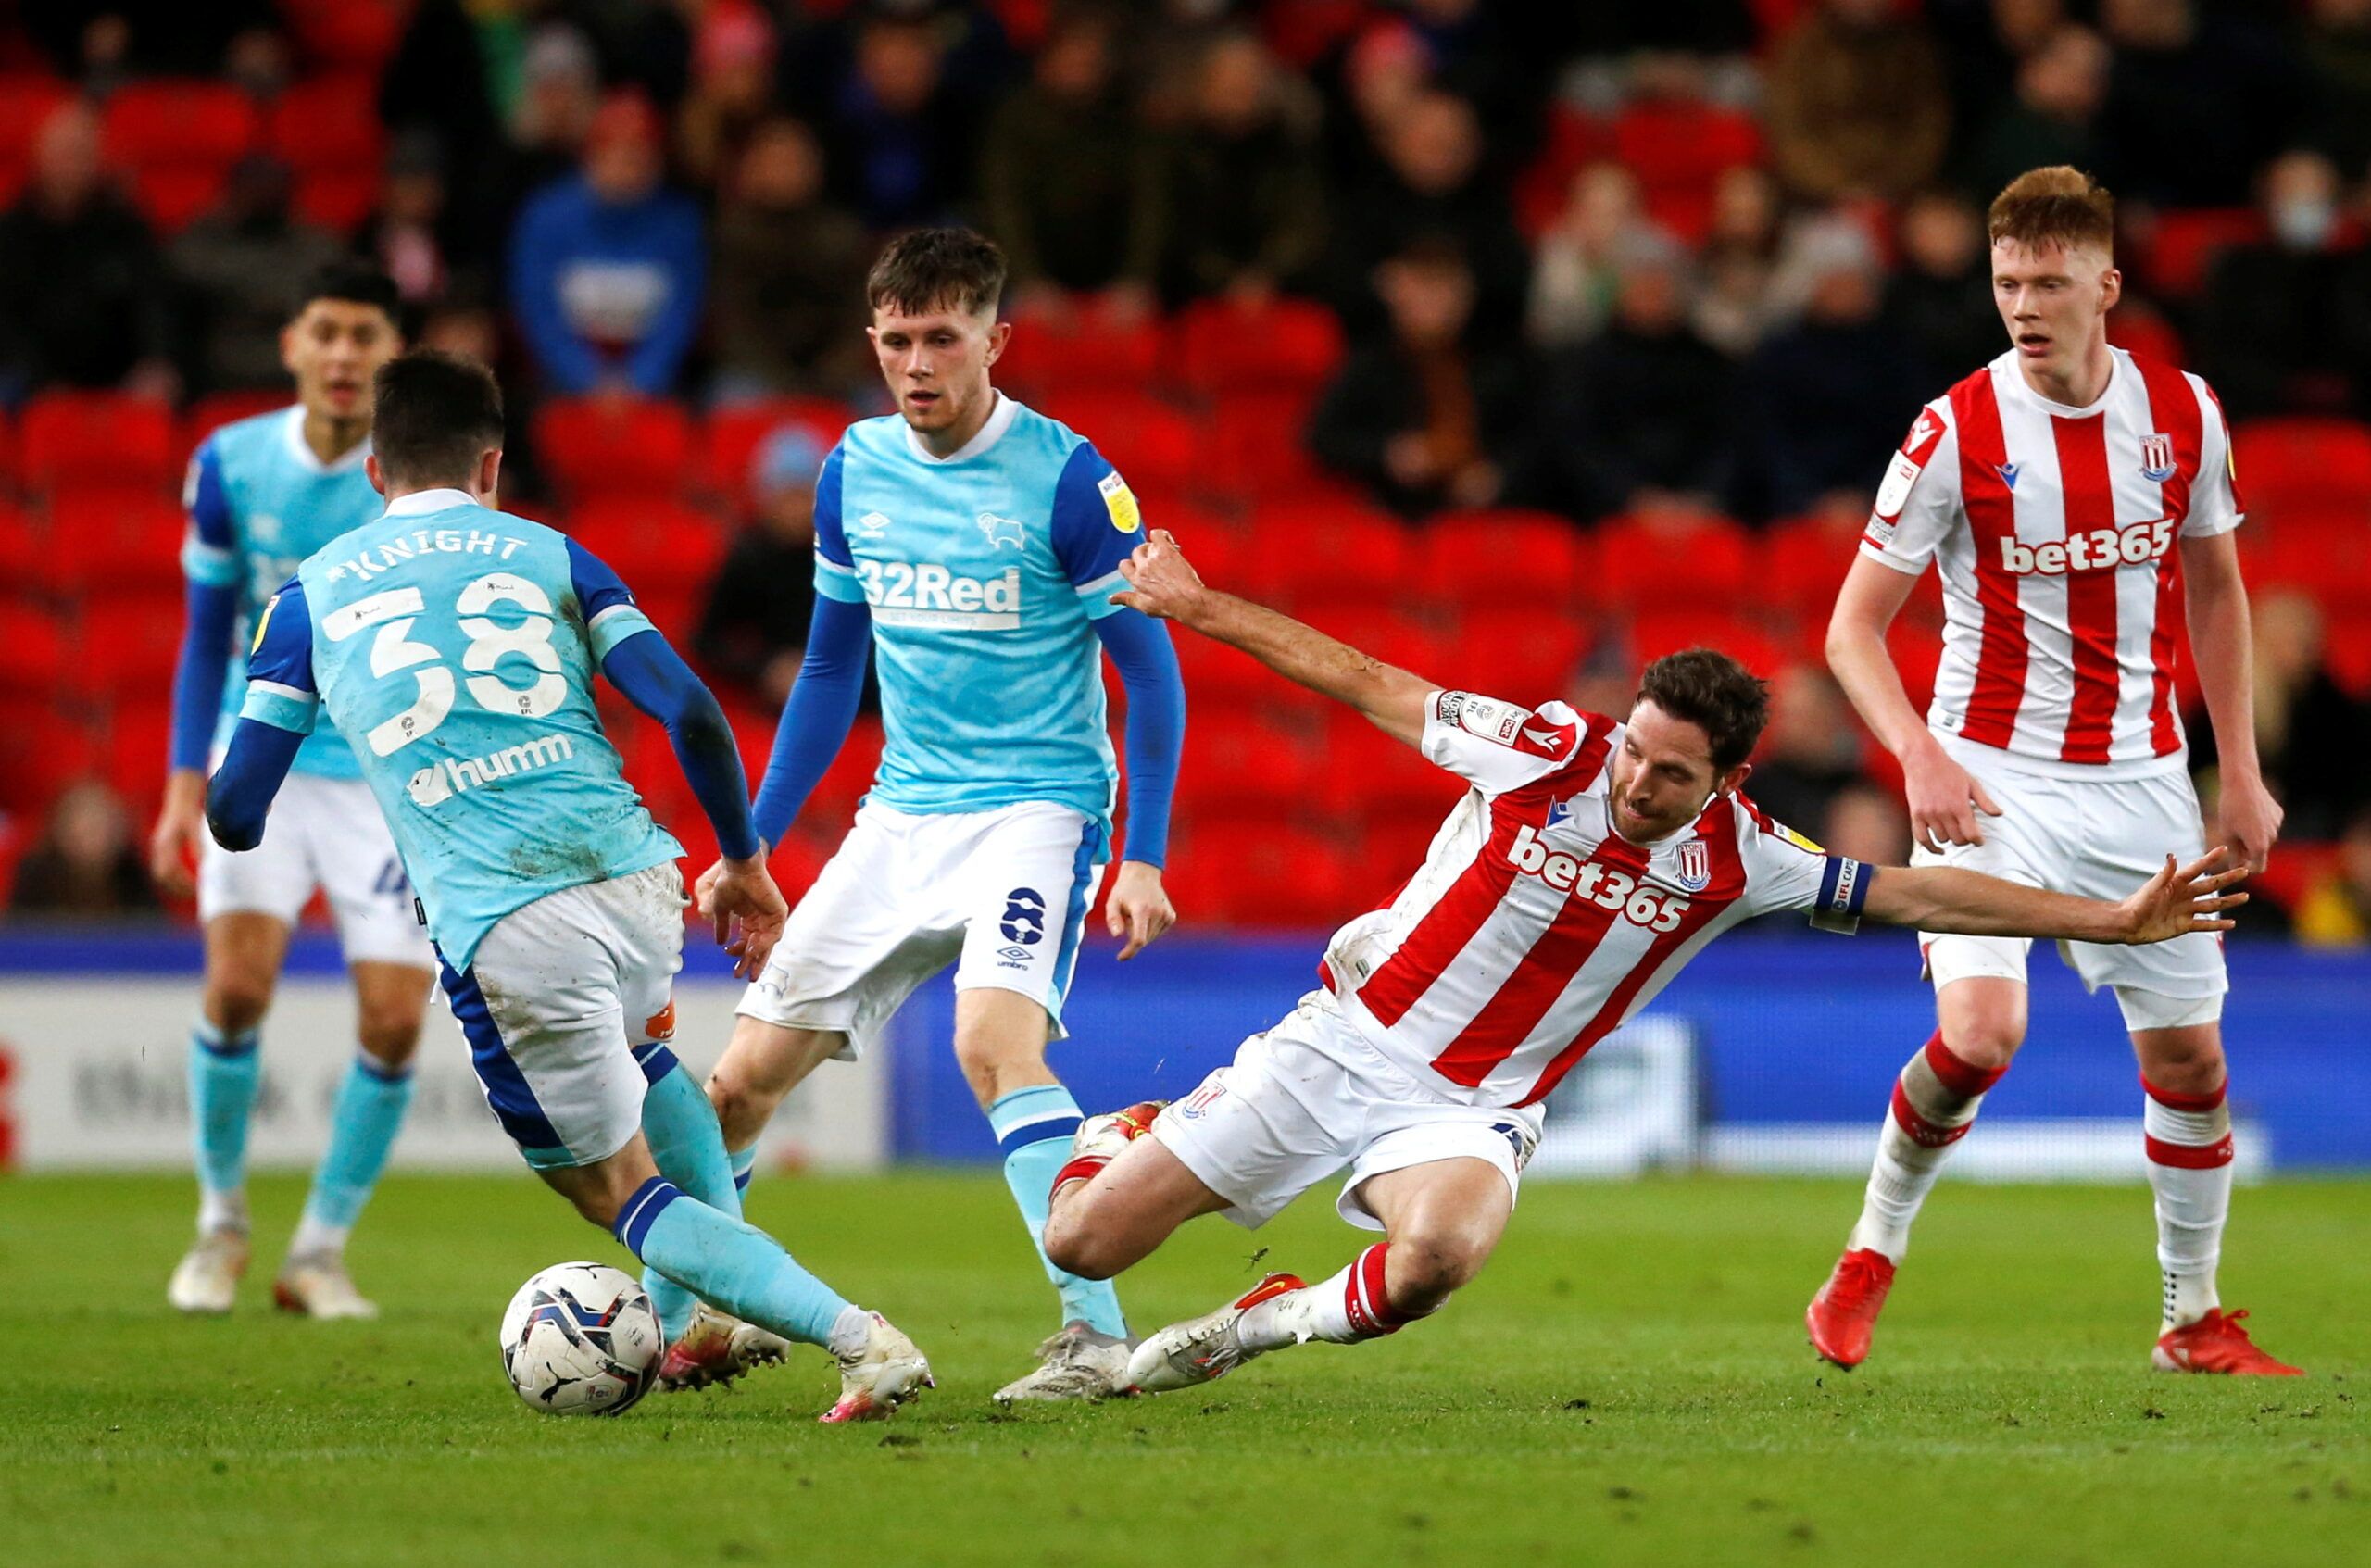 Soccer Football - Championship - Stoke City v Derby County - bet365 Stadium, Stoke-On-Trent, Britain - December 30, 2021  Stoke City's Joe Allen in action  Action Images/Ed Sykes  EDITORIAL USE ONLY. No use with unauthorized audio, video, data, fixture lists, club/league logos or 